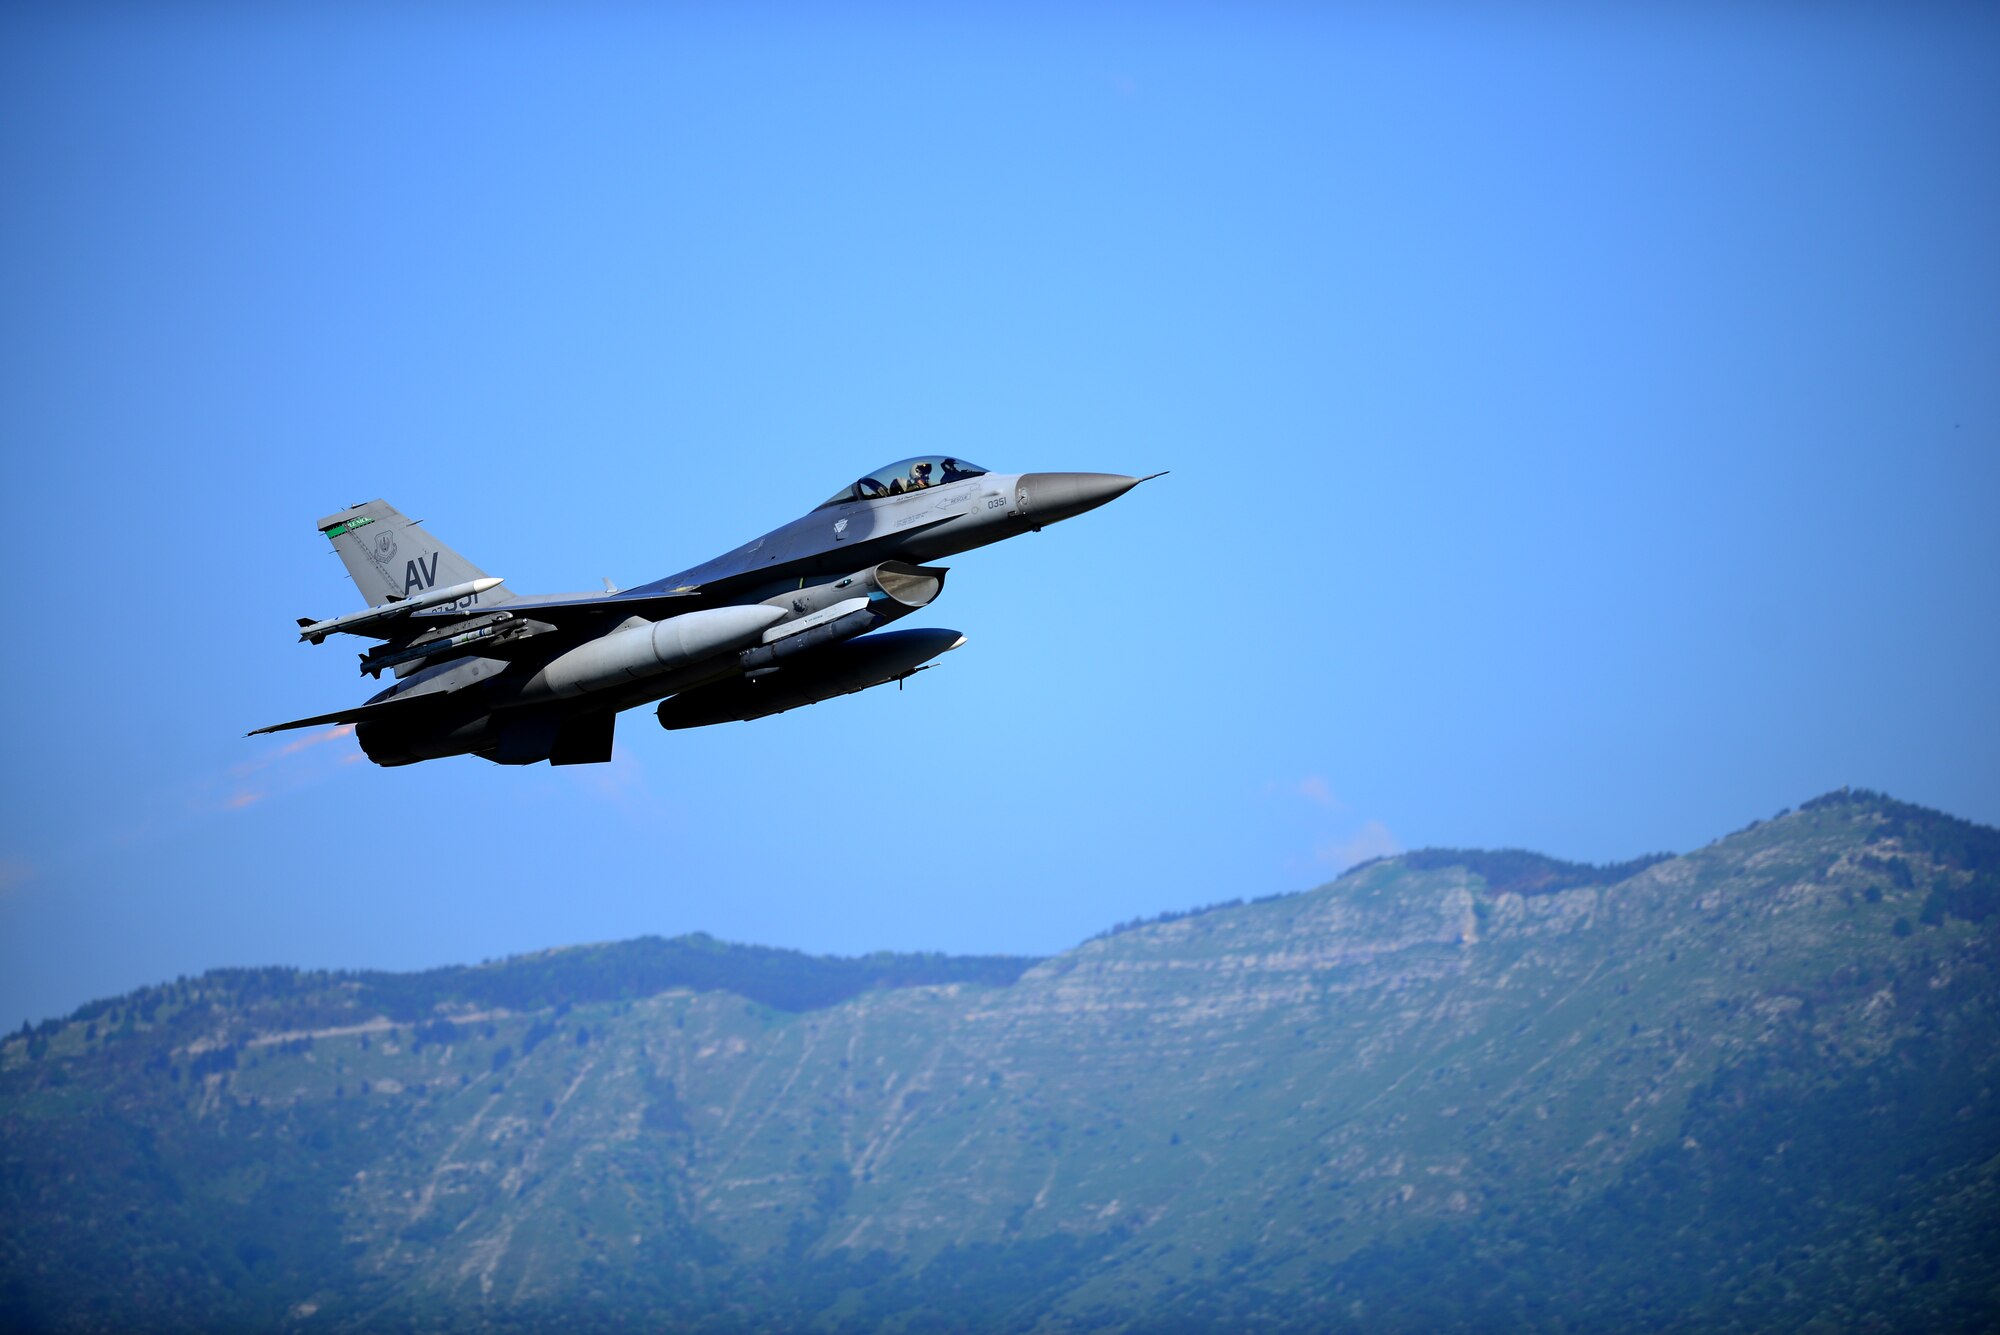 An F-16 Fighting Falcon from the 555th Fighter Squadron takes off on the first day of Astral Knight 19 at Aviano Air Base, Italy, on June 3, 2019. The U.S. and our NATO partners and allies continue to strengthen our deterrence efforts and improve readiness through multinational exercises like AK19. (U.S. Air Force photo by Airman 1st Class Caleb House)